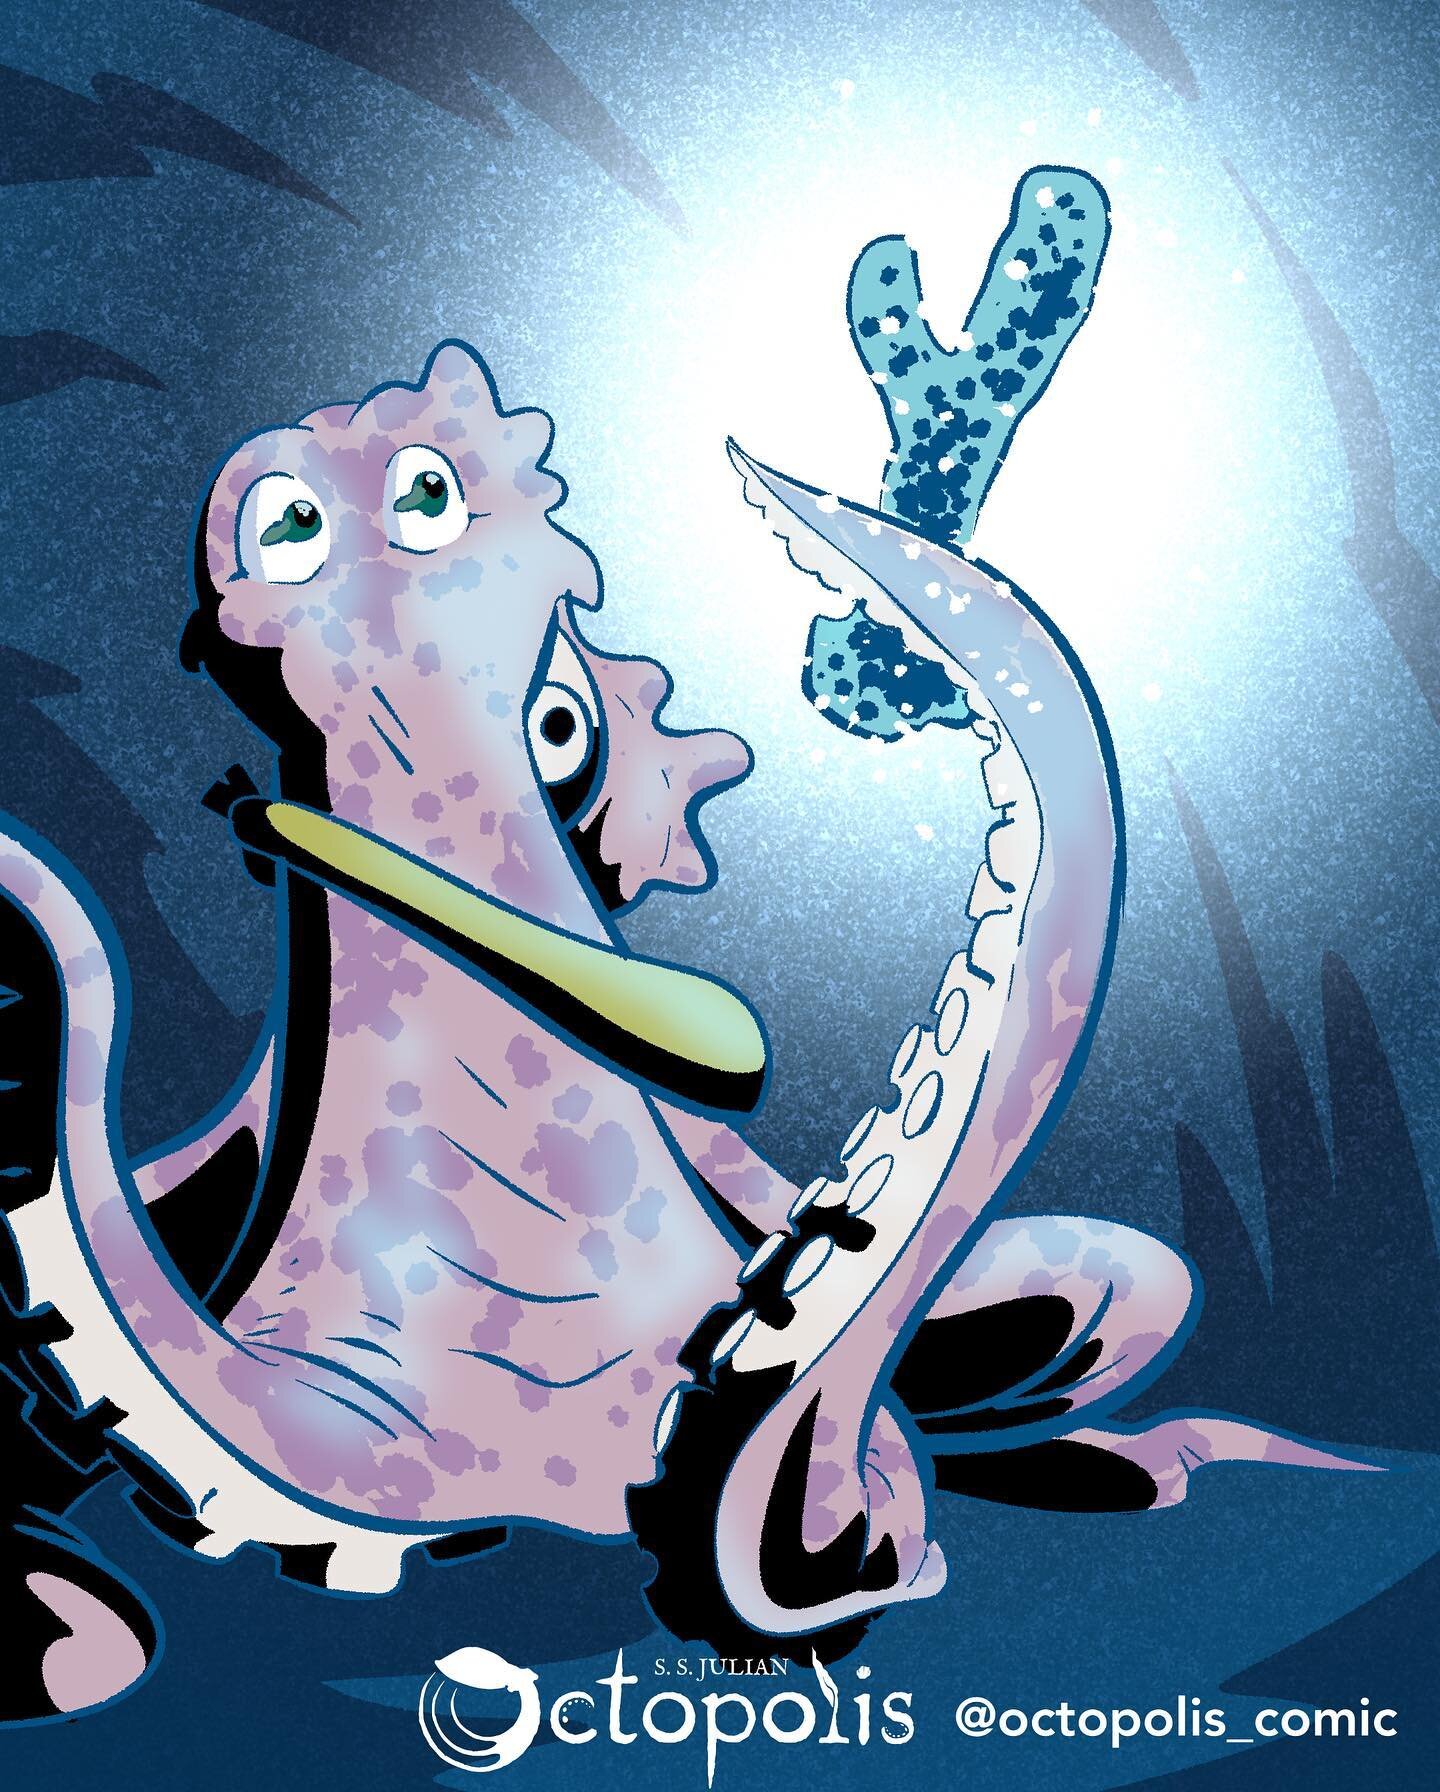 What new wonders does this cavern hold?

#octopus #comic #bioluminescent #digitalart @clipstudioofficial